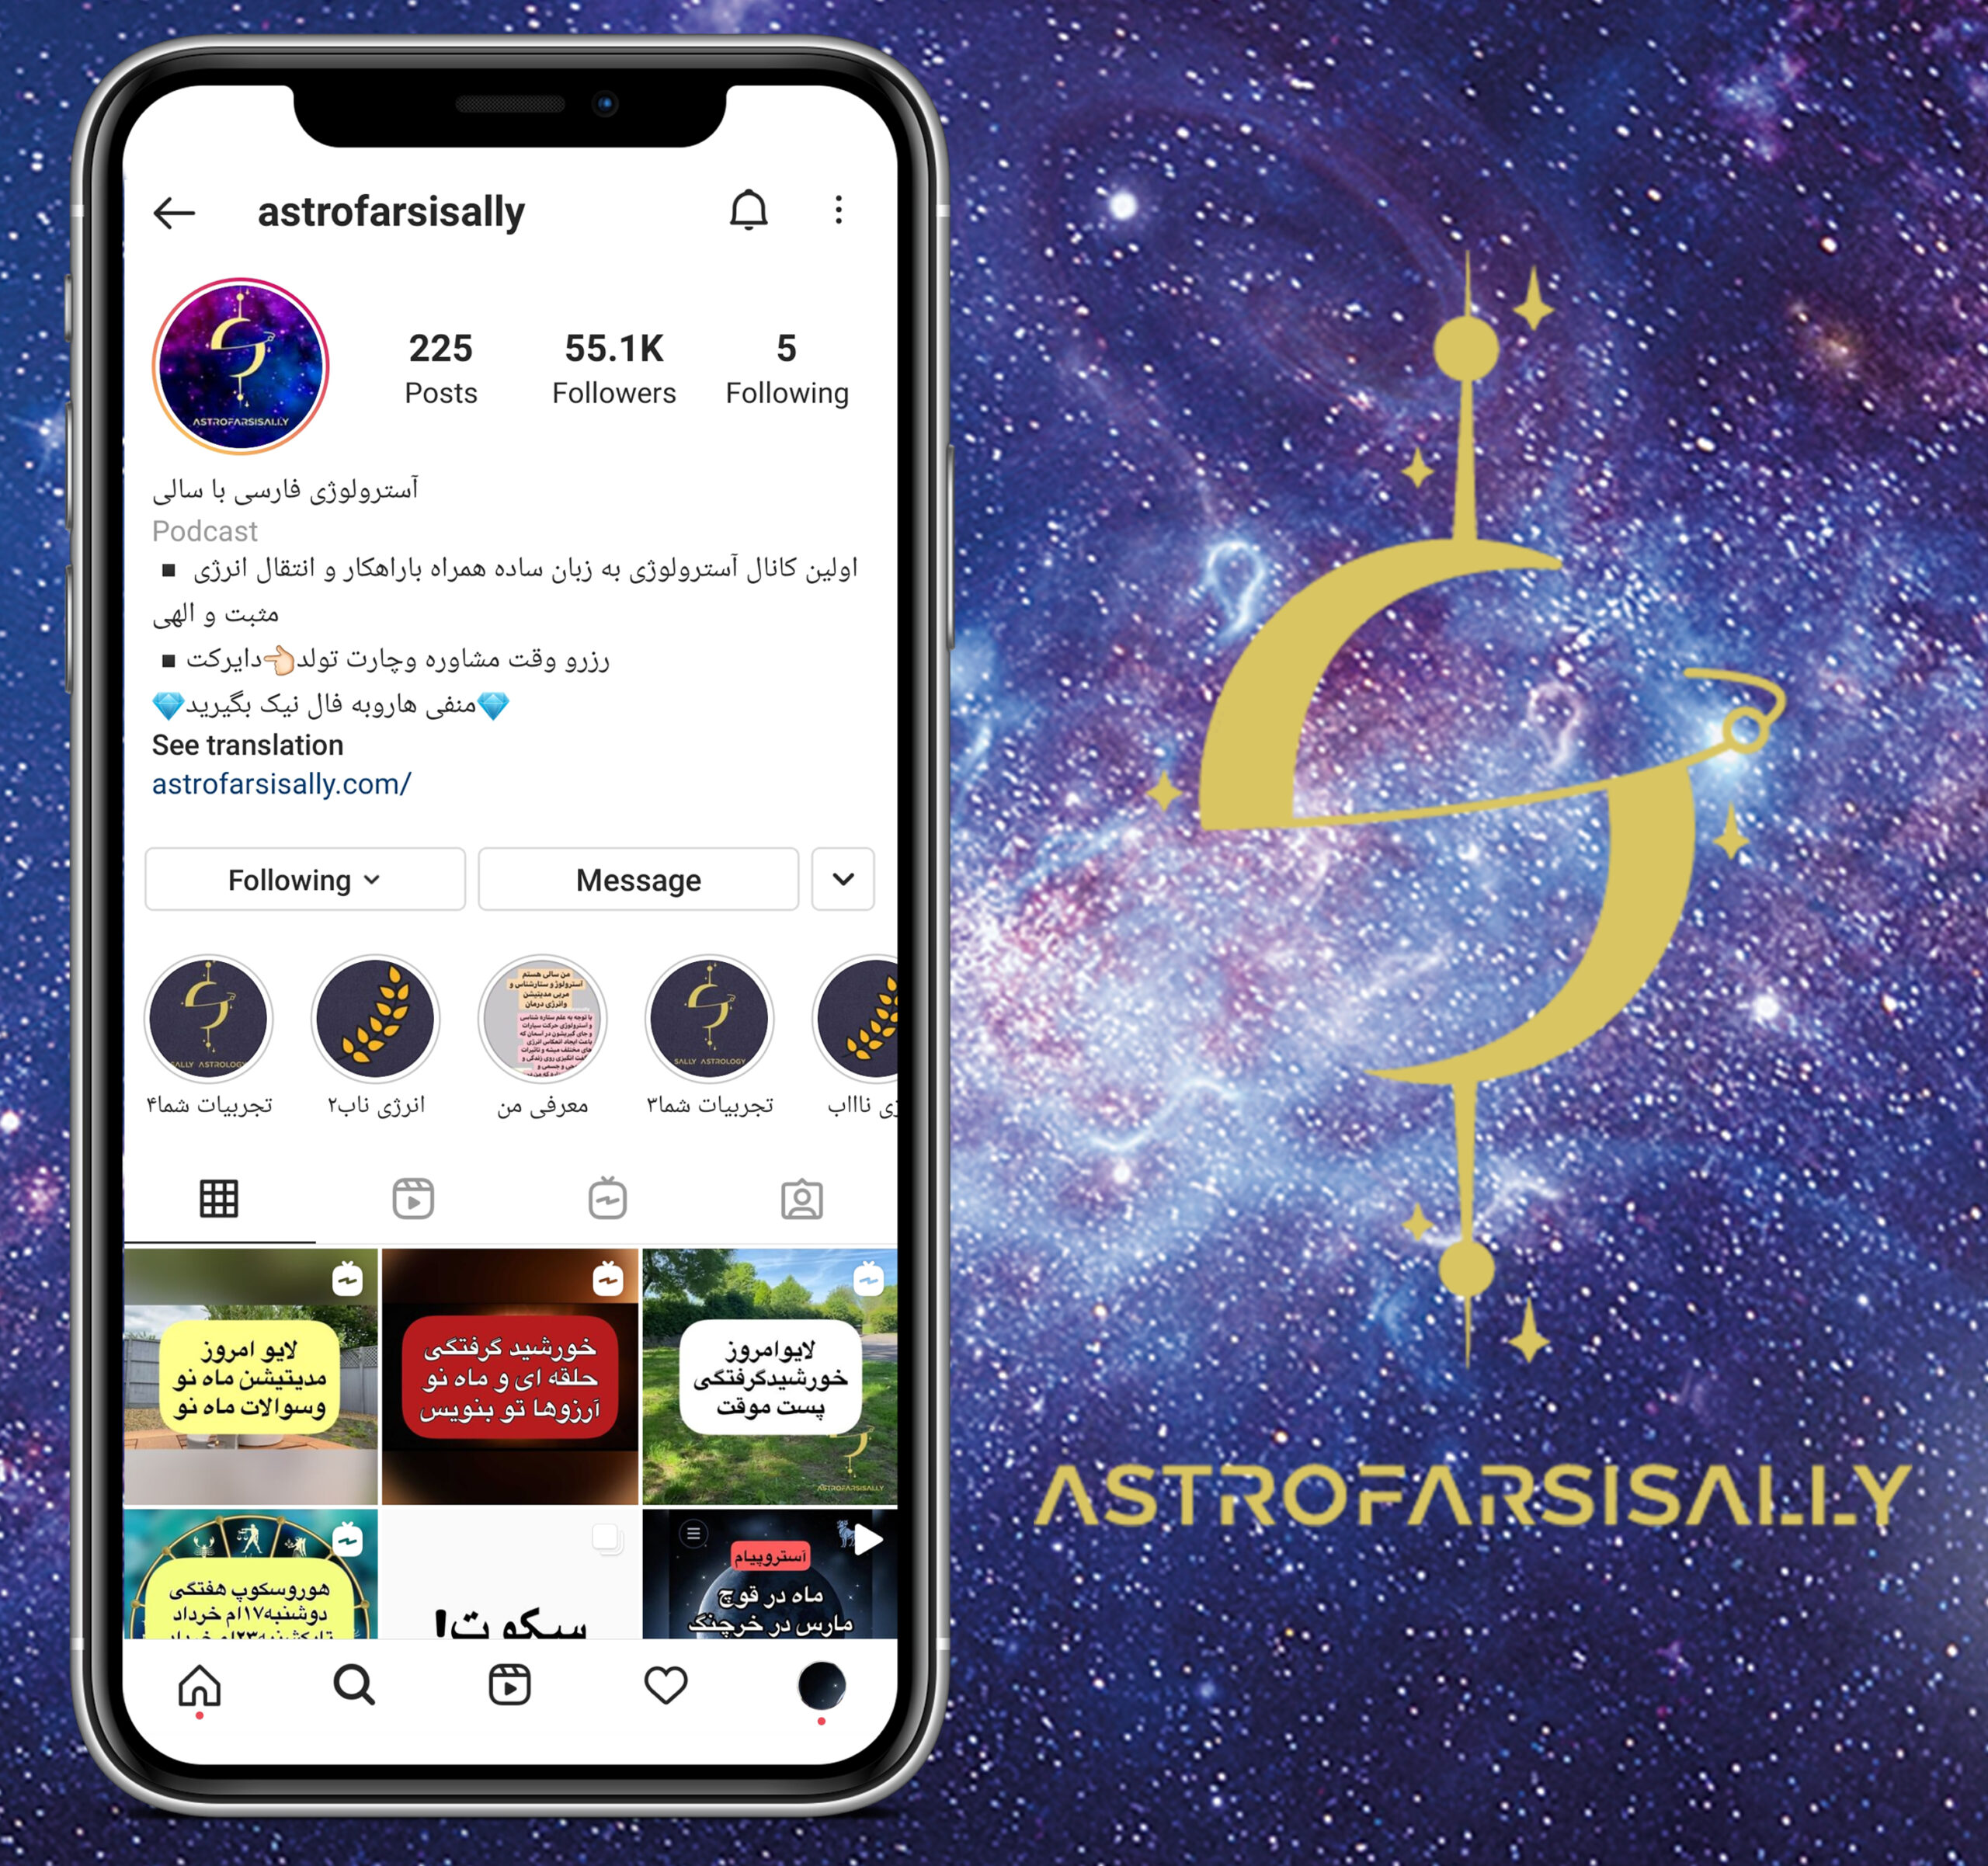 Astro Farsi Sally description of the history of the horoscope and its association with astrology